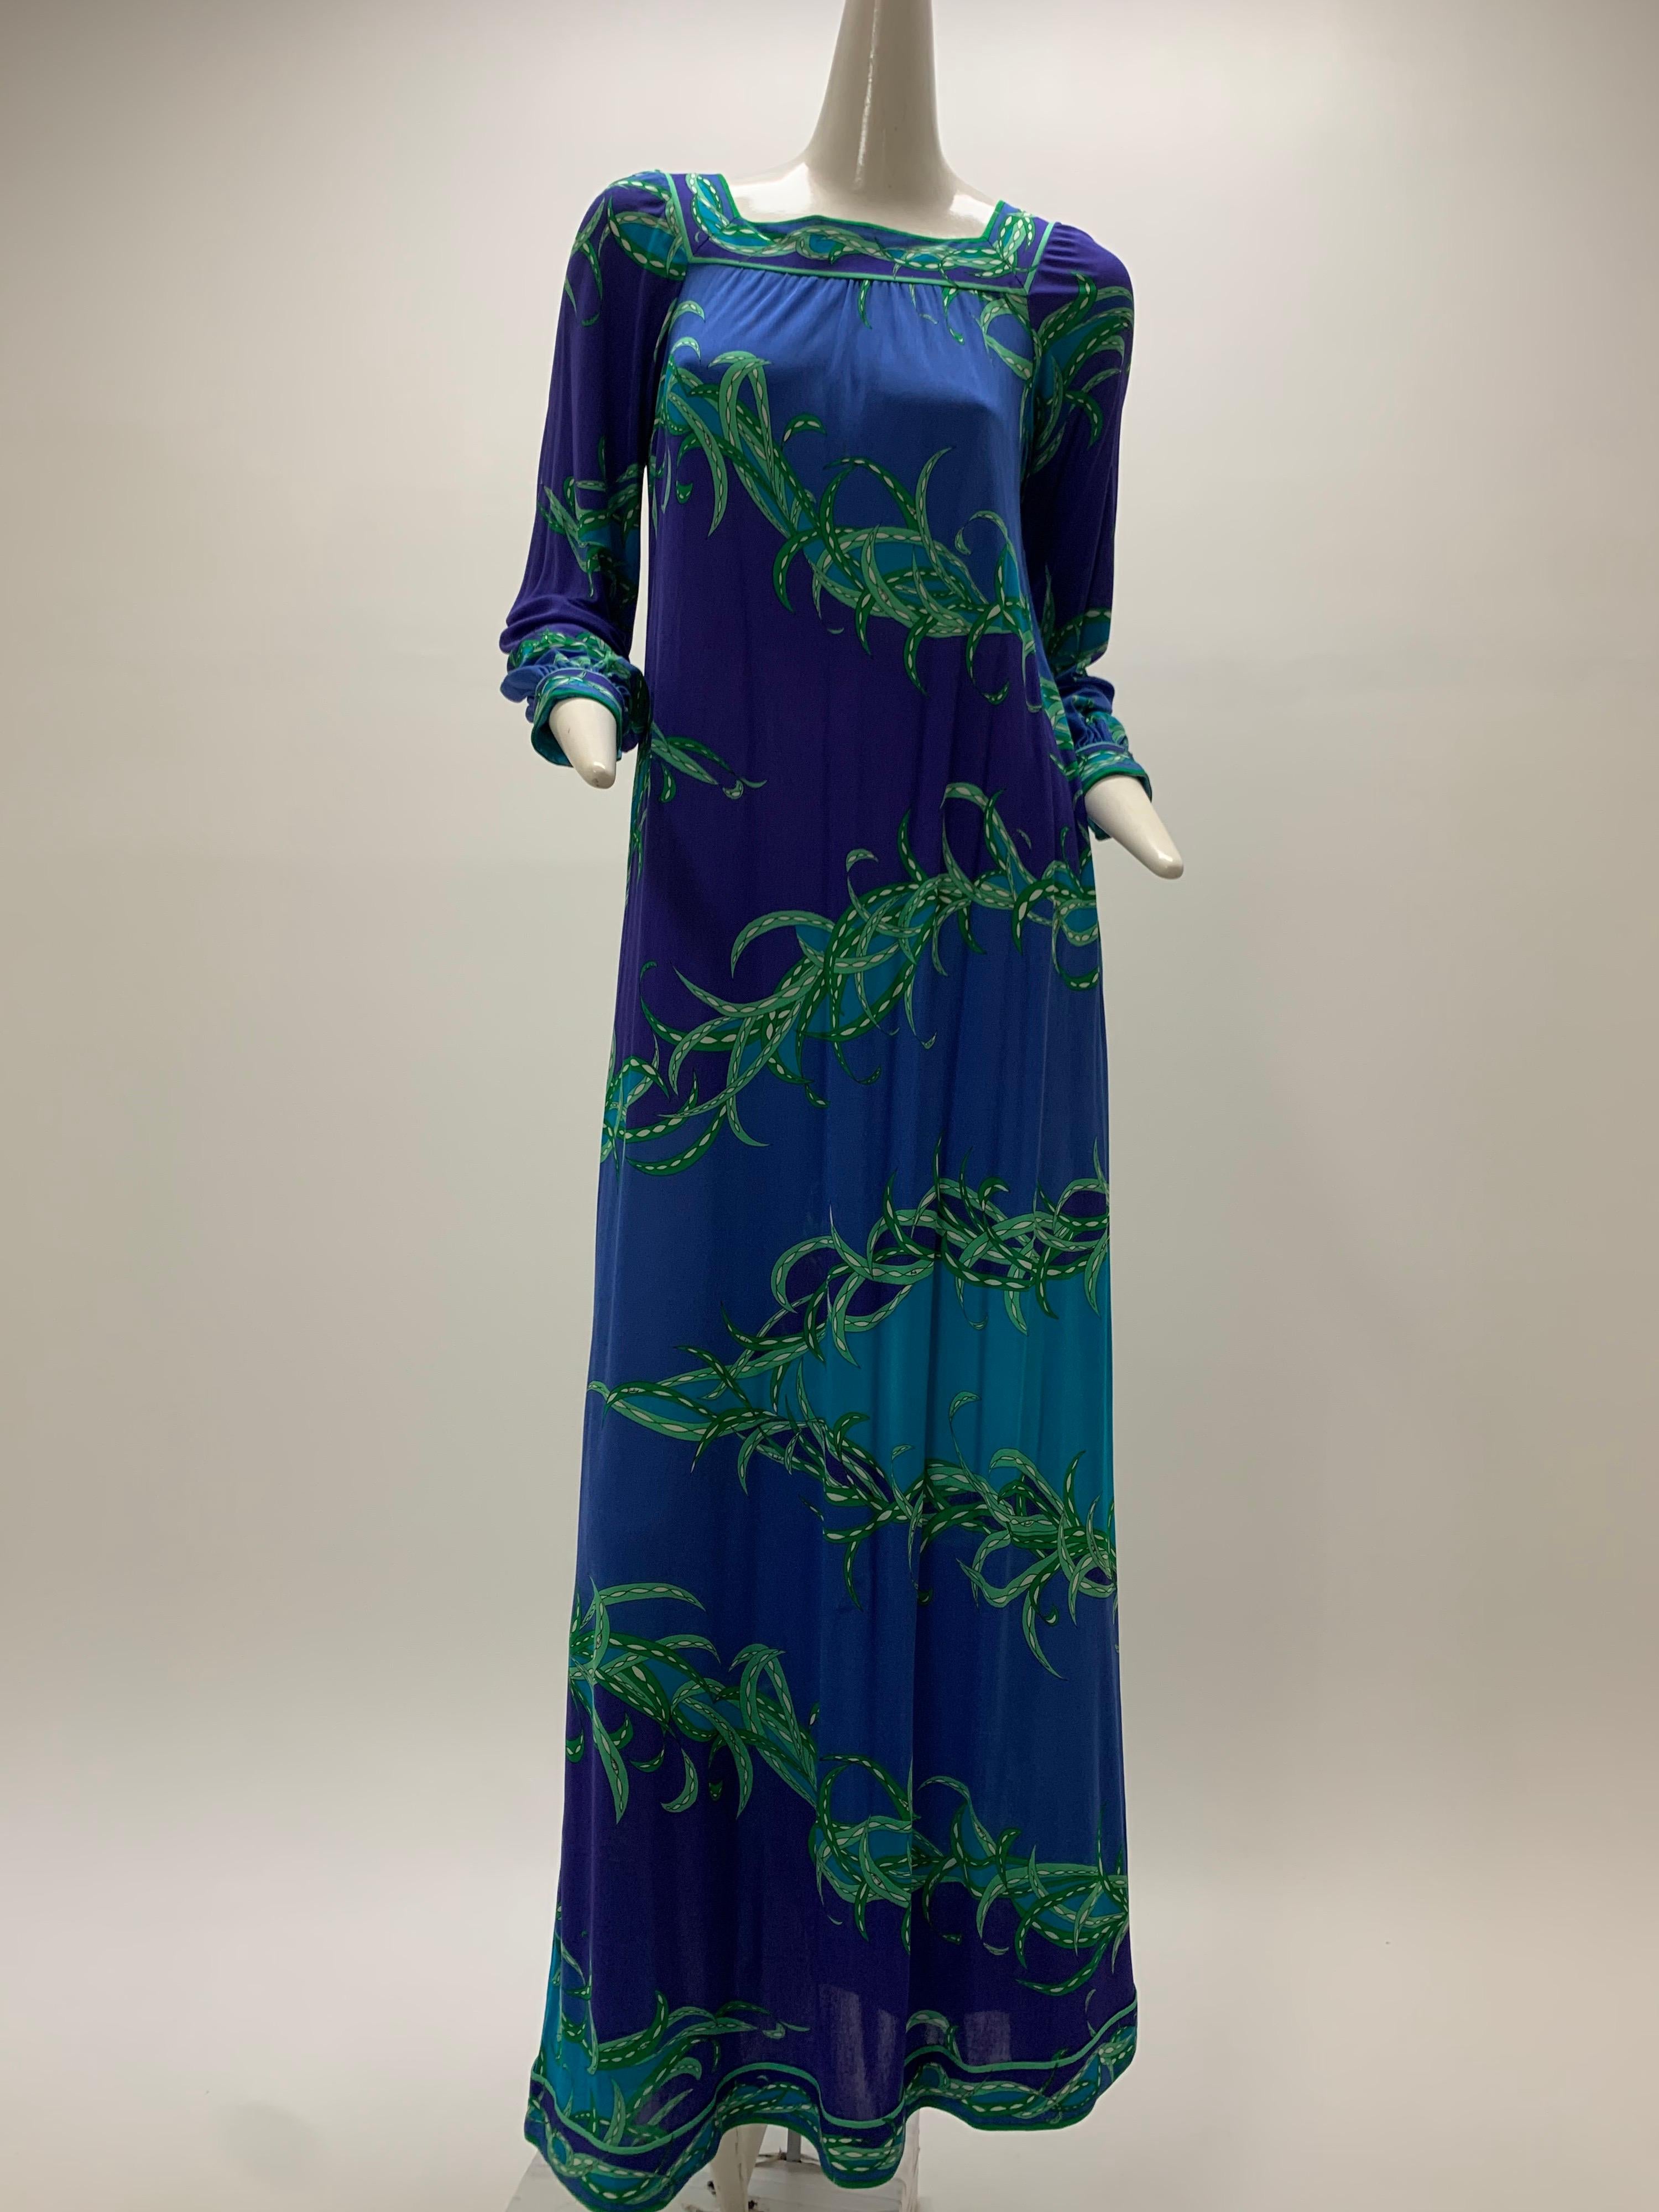 A wonderful 1970s Emilio Pucci long-sleeved silk jersey print maxi dress in purple, blue, aqua and green. Banded cuffs, hem and squared neckline. Slip-on shift style design.